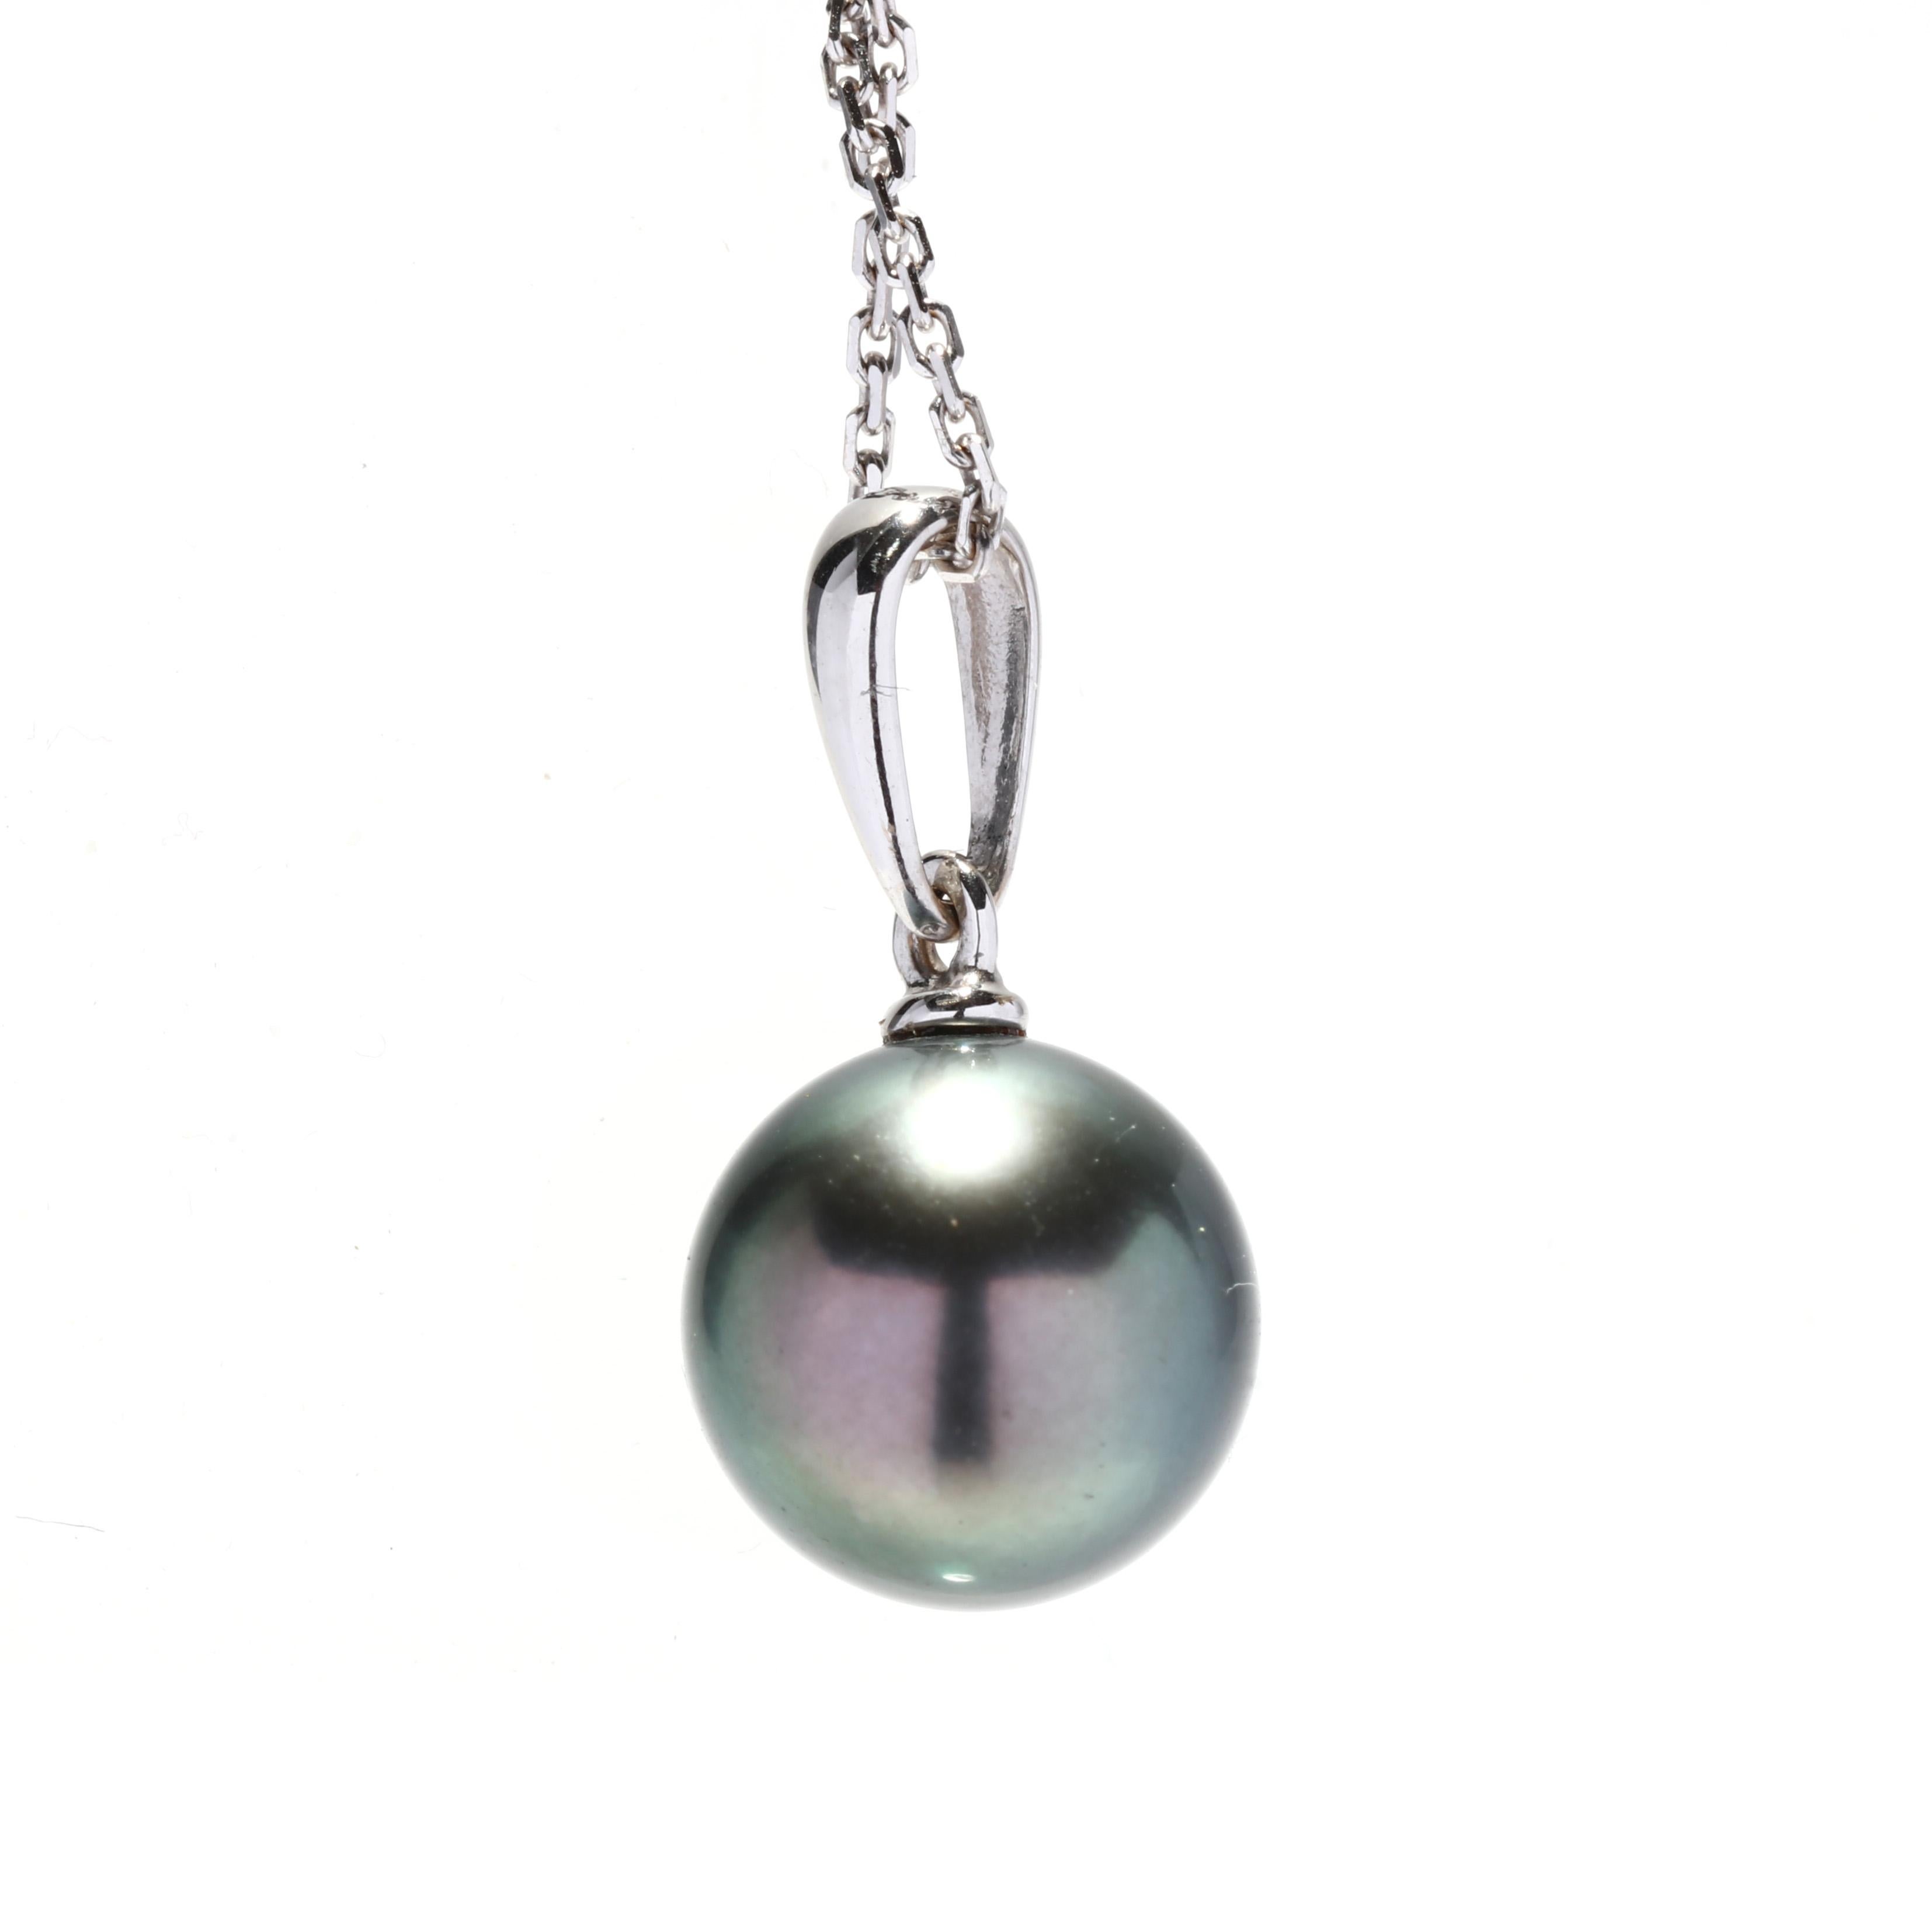 A 14 karat white gold Tahitian pearl solitaire pendant necklace. This simple necklace features a round bead Tahitian pearl suspended from a thin tapered bail and a thin cable chain with a spring ring clasp.

Stones:
- Tahitian pearl, 1 stone
- round